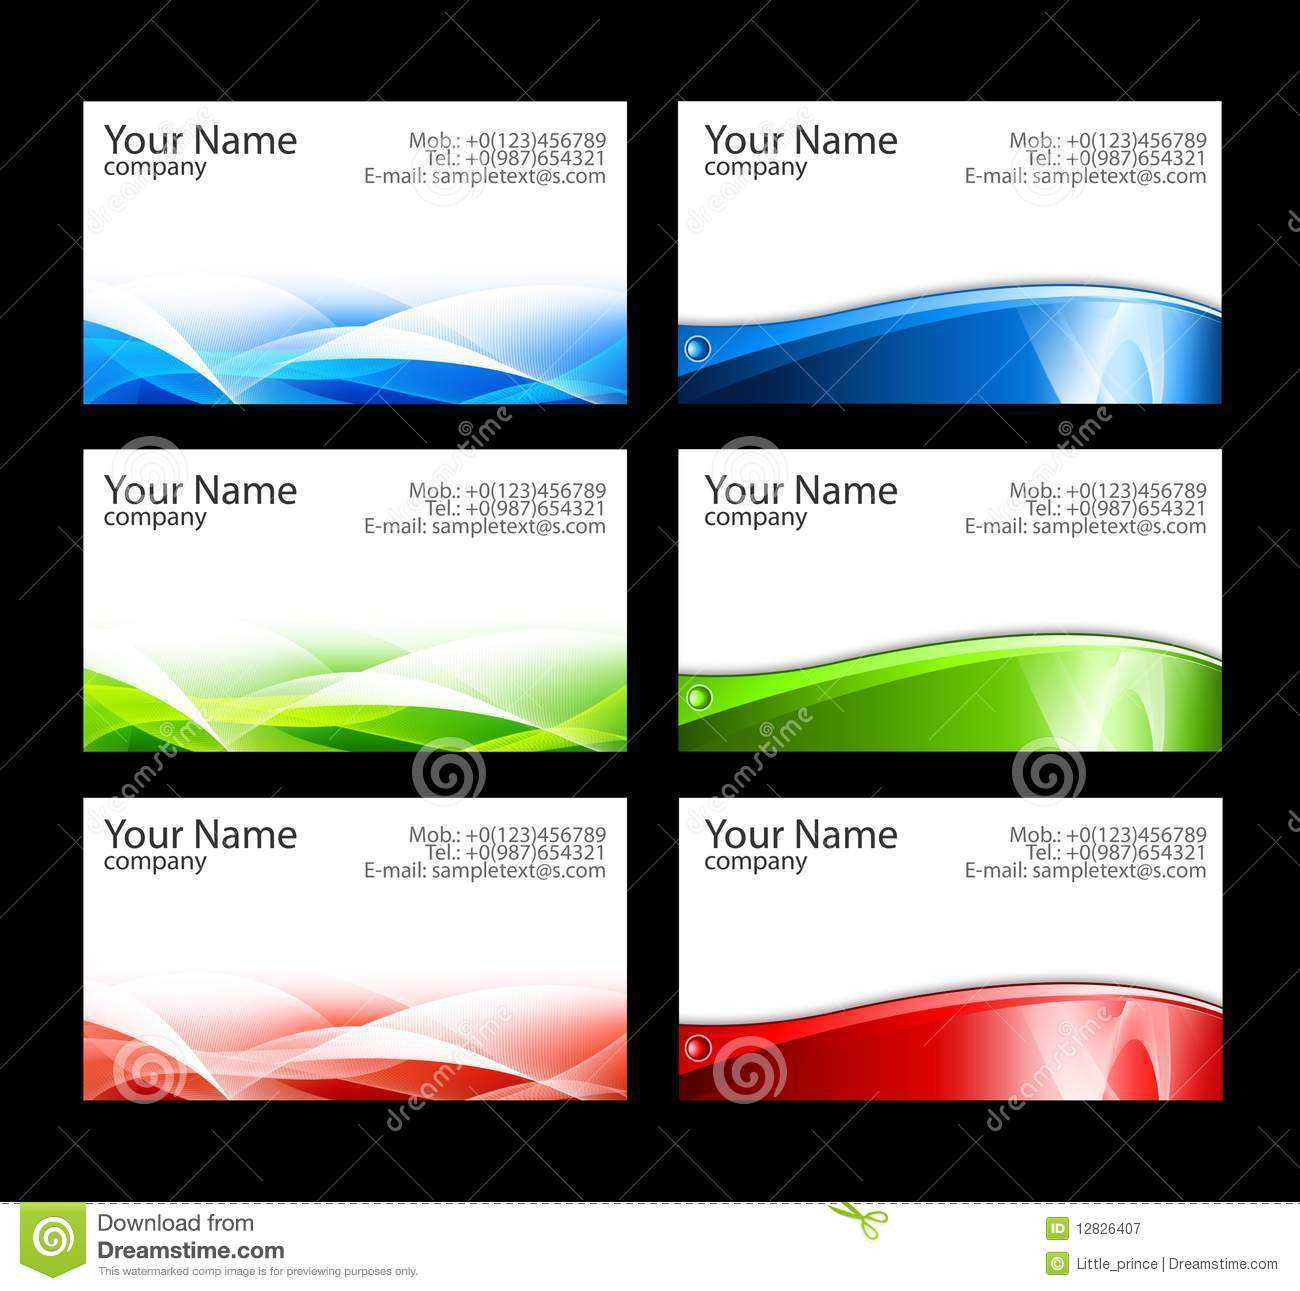 17 Business Cards Templates Free Downloads Images – Free For Templates For Visiting Cards Free Downloads